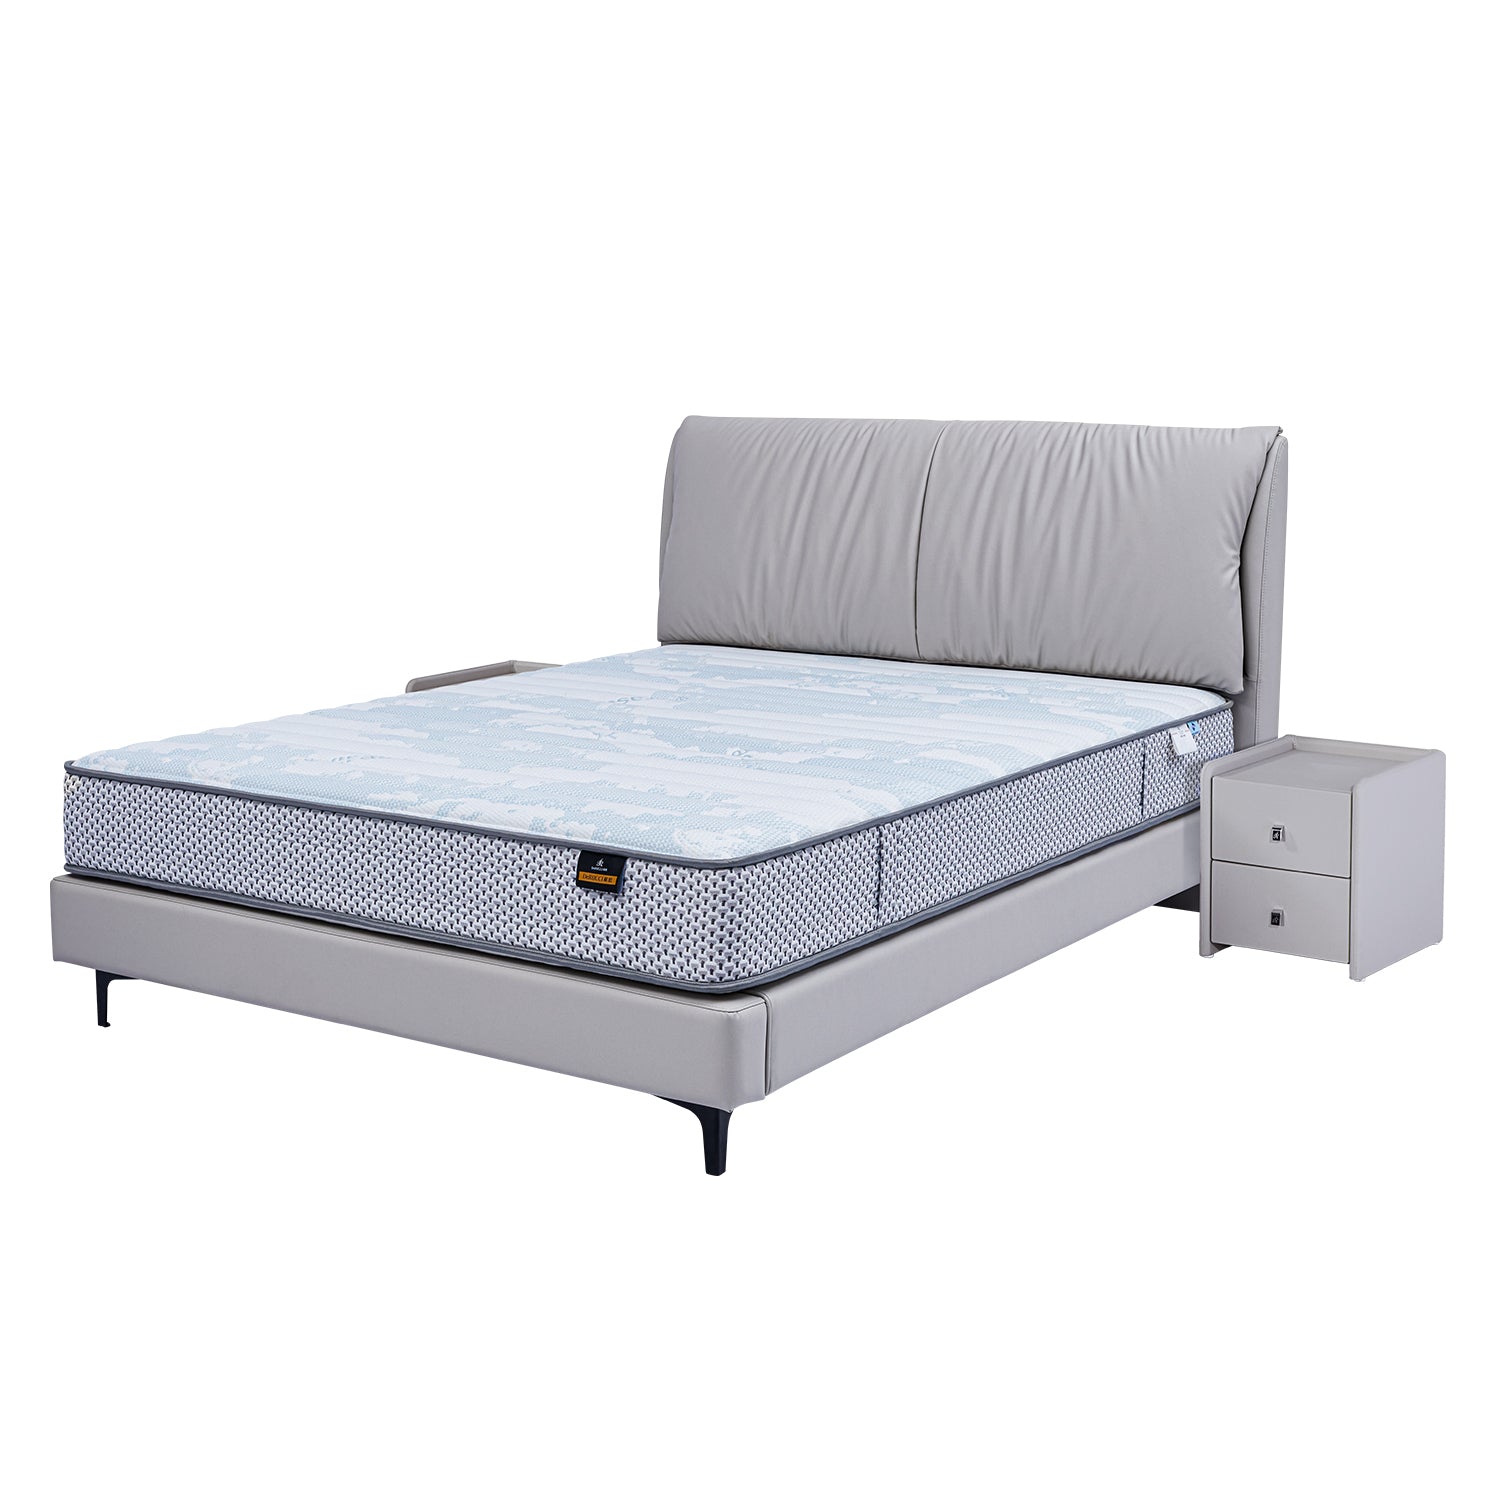 DeRUCCI Bed Frame BOC1 - 012 with sleek grey leather upholstery, paired with a blue and white patterned mattress, and a matching grey nightstand with two drawers.